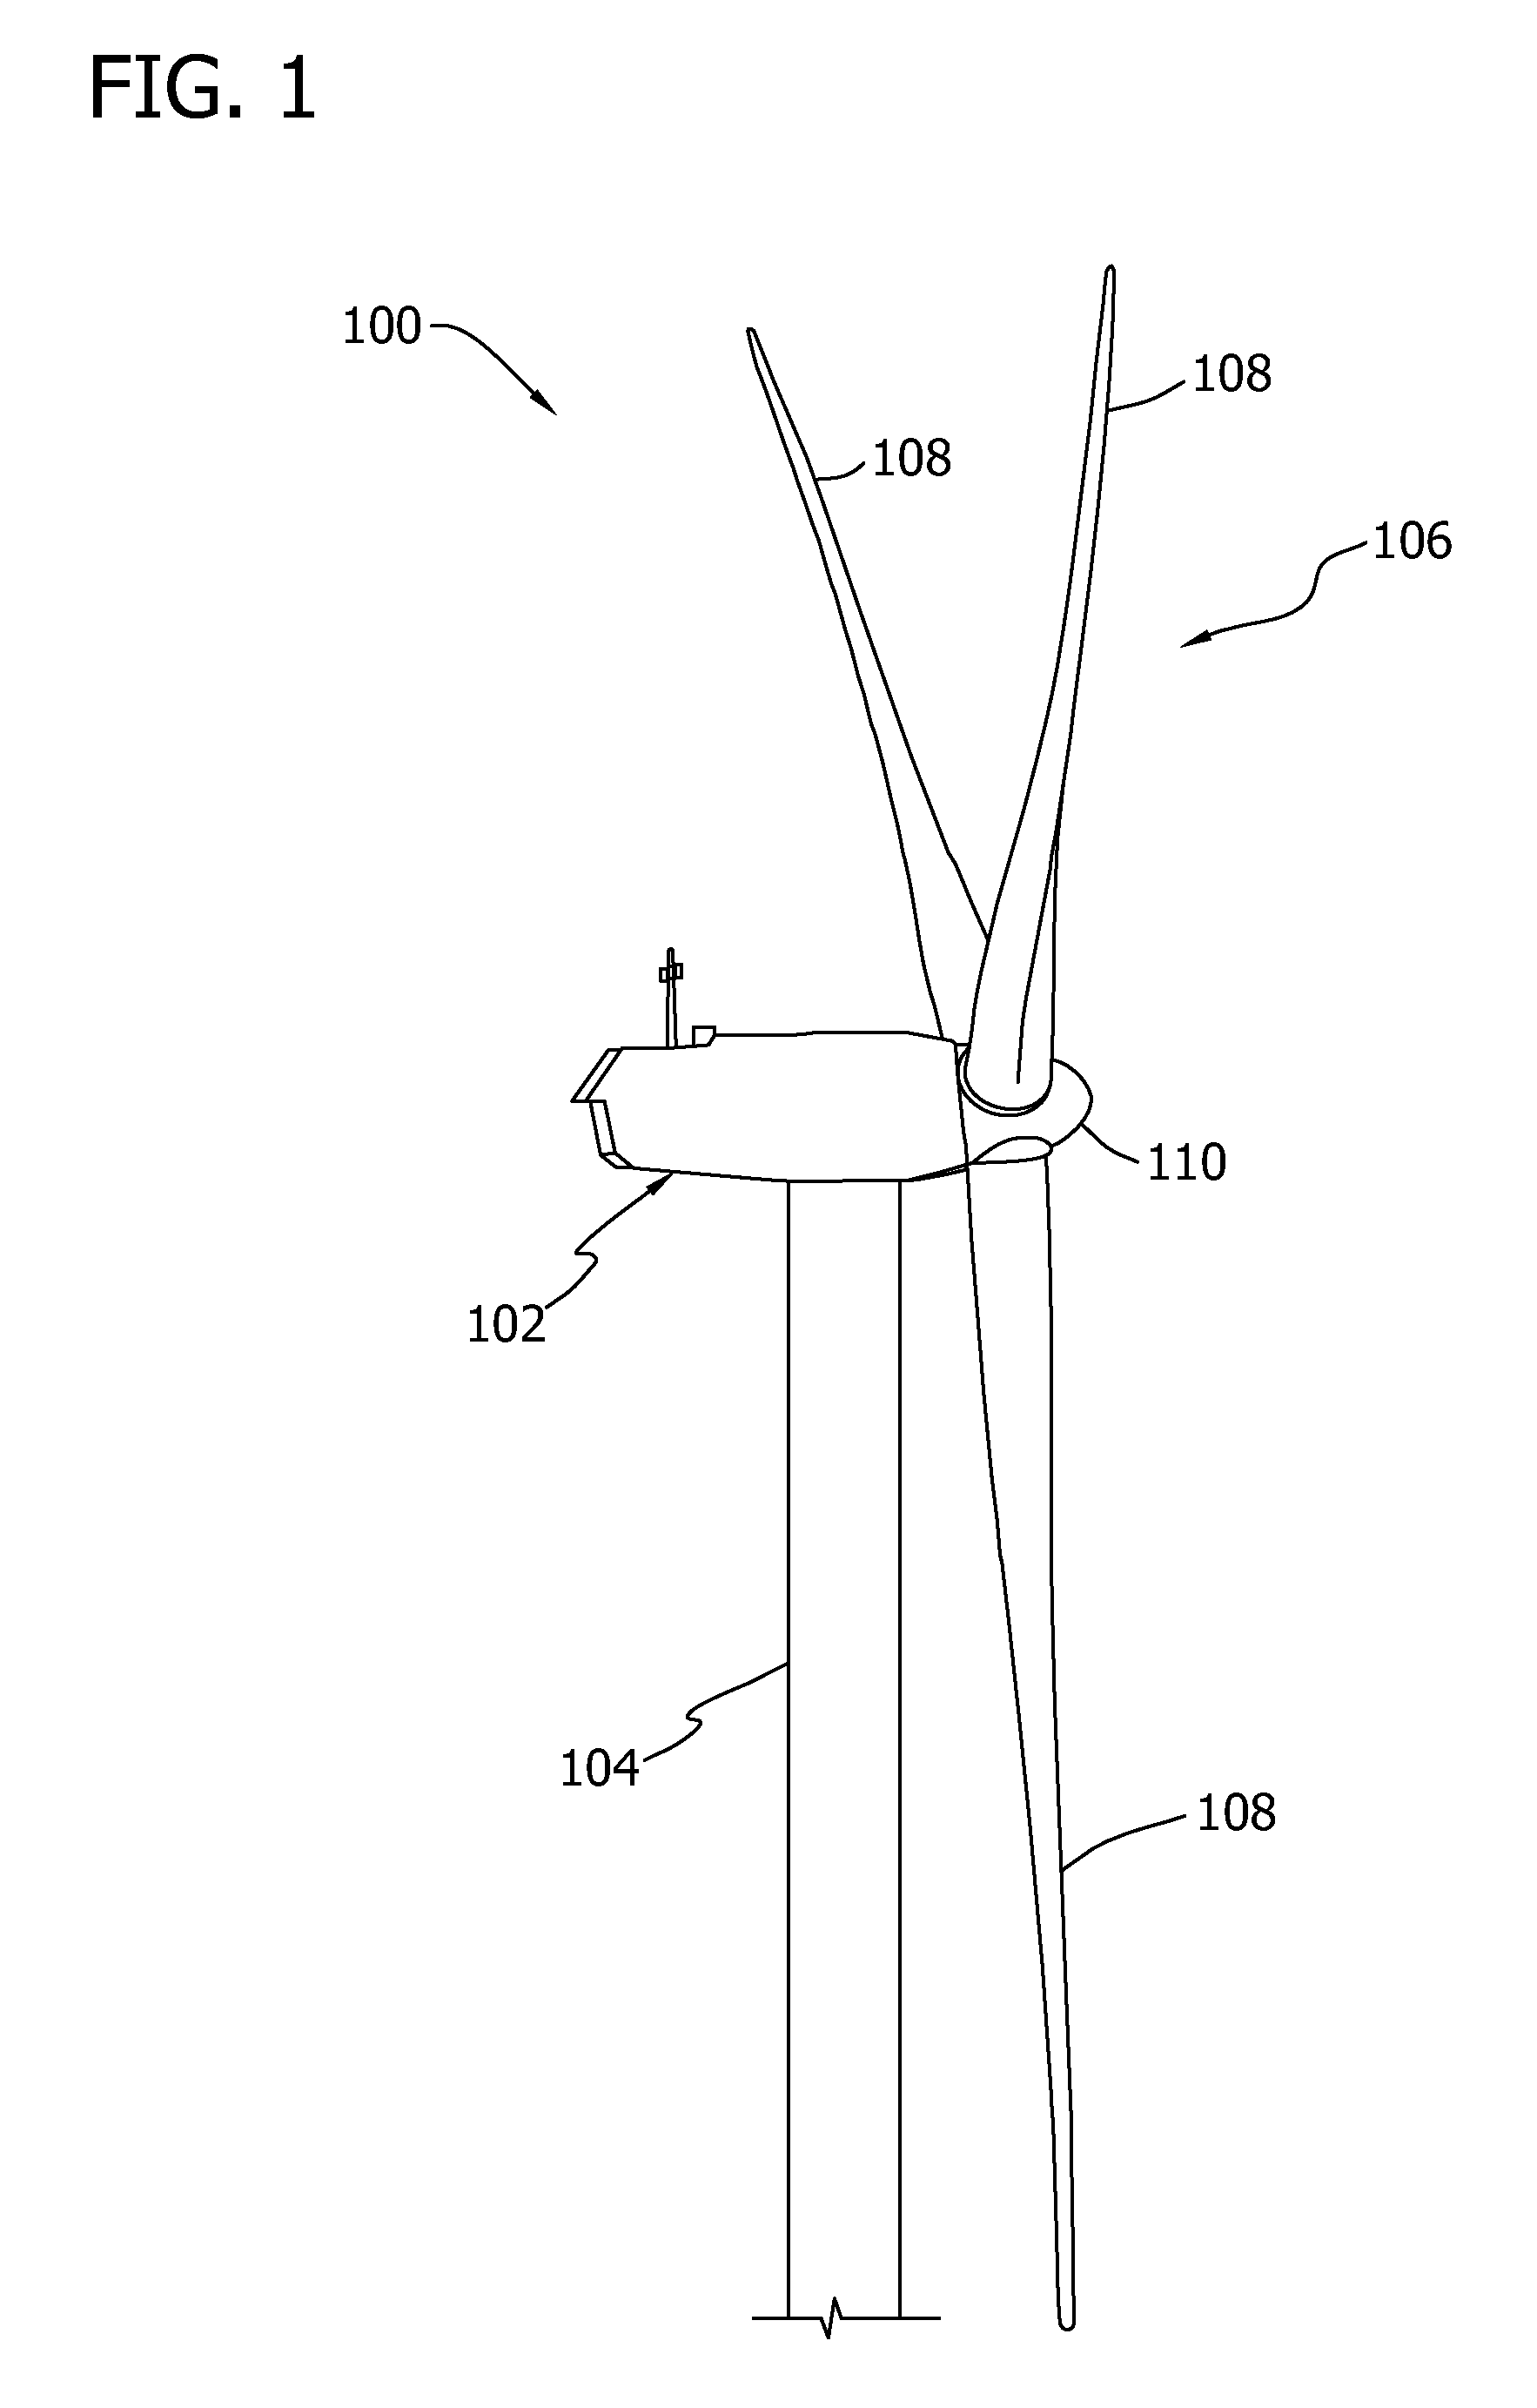 Overvoltage clipping device for a wind turbine and method